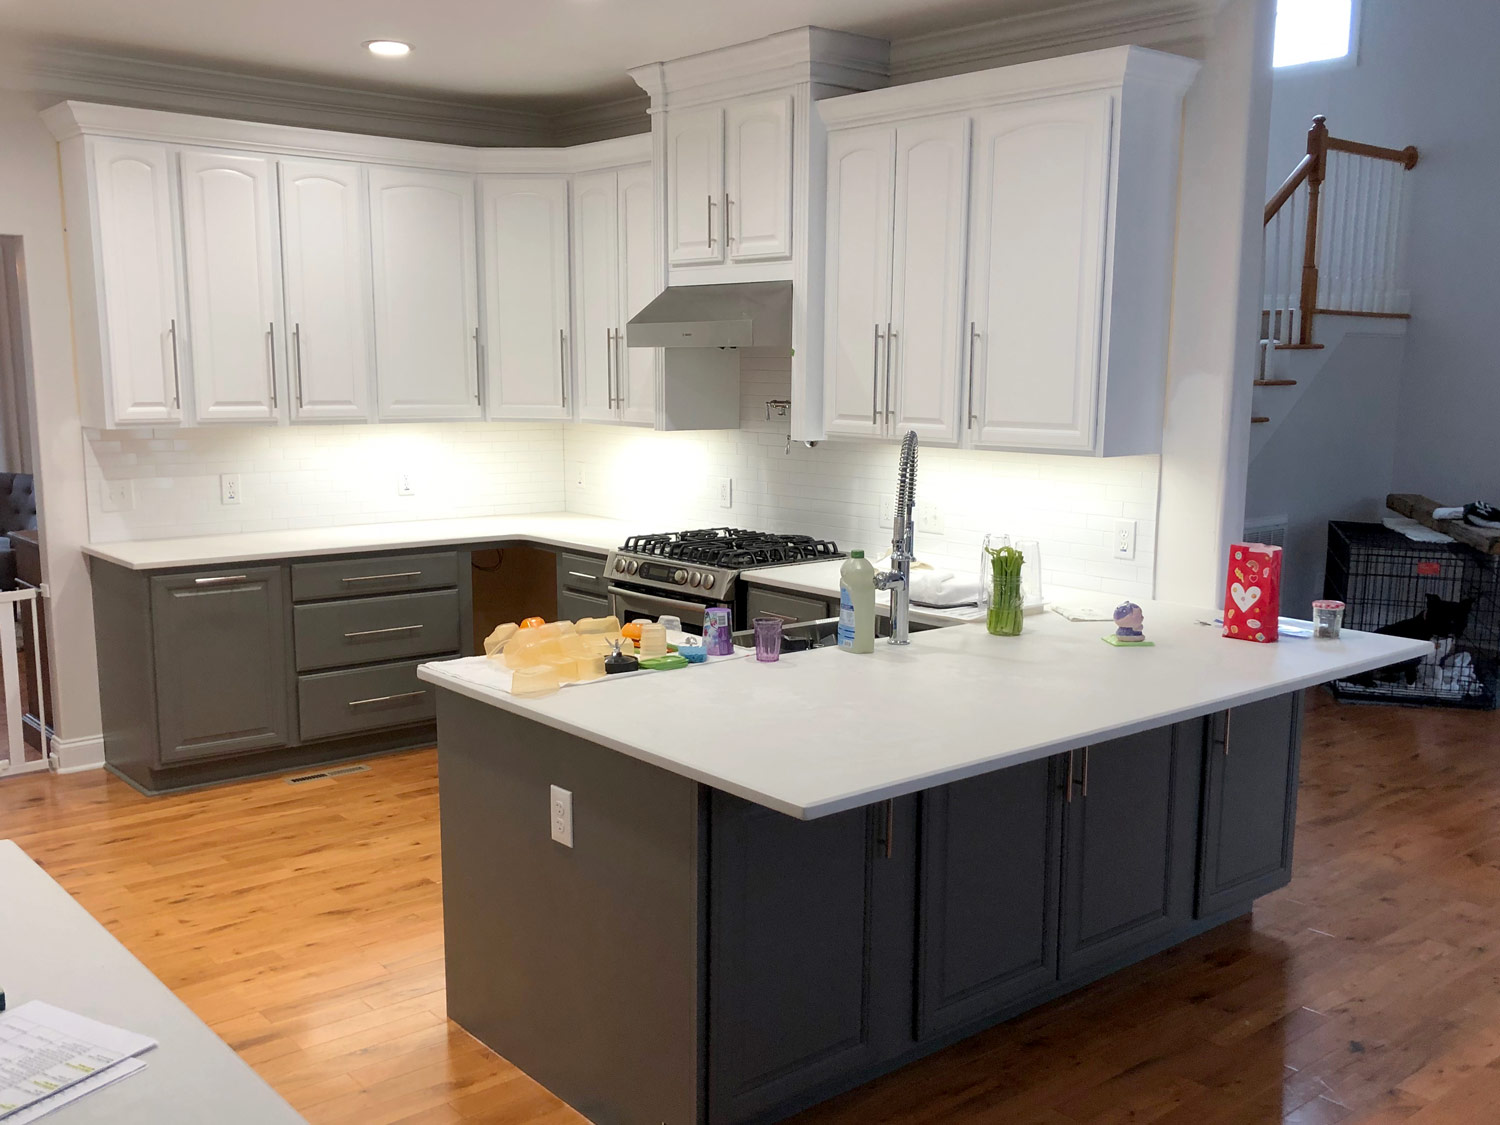 Two-tone cabinets kitchen wish list must haves of 2019